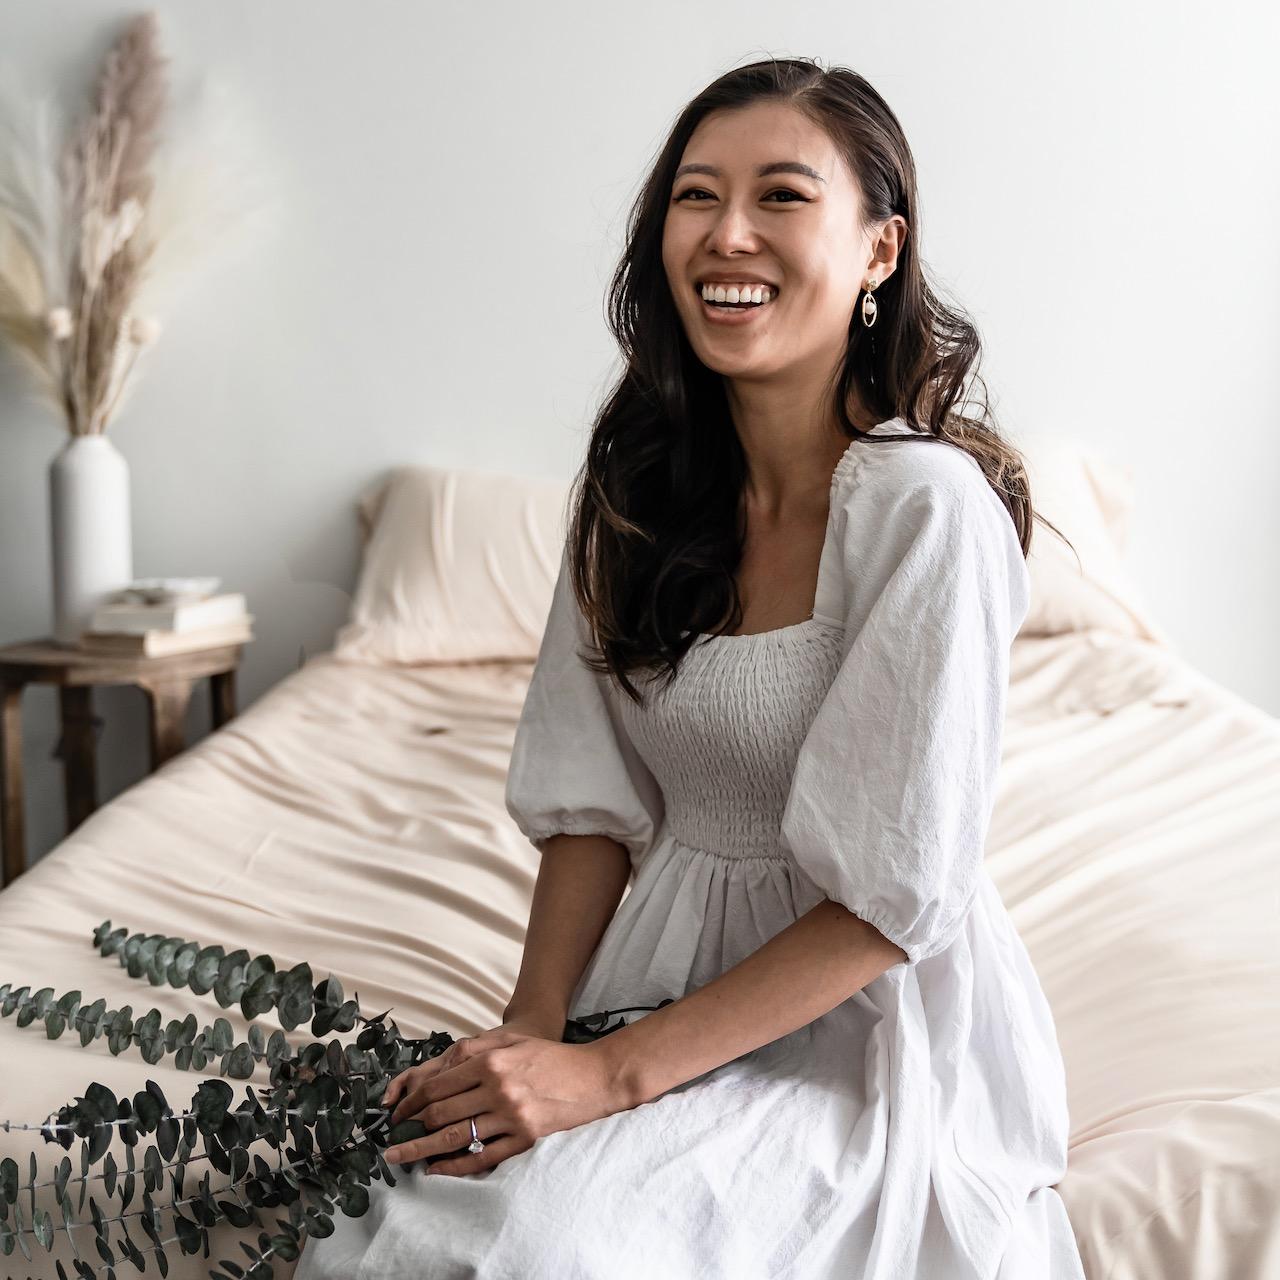 Founder of Eucalypso, Elle Liu, sitting on a bed in a white dress holding branches of eucalyptus.